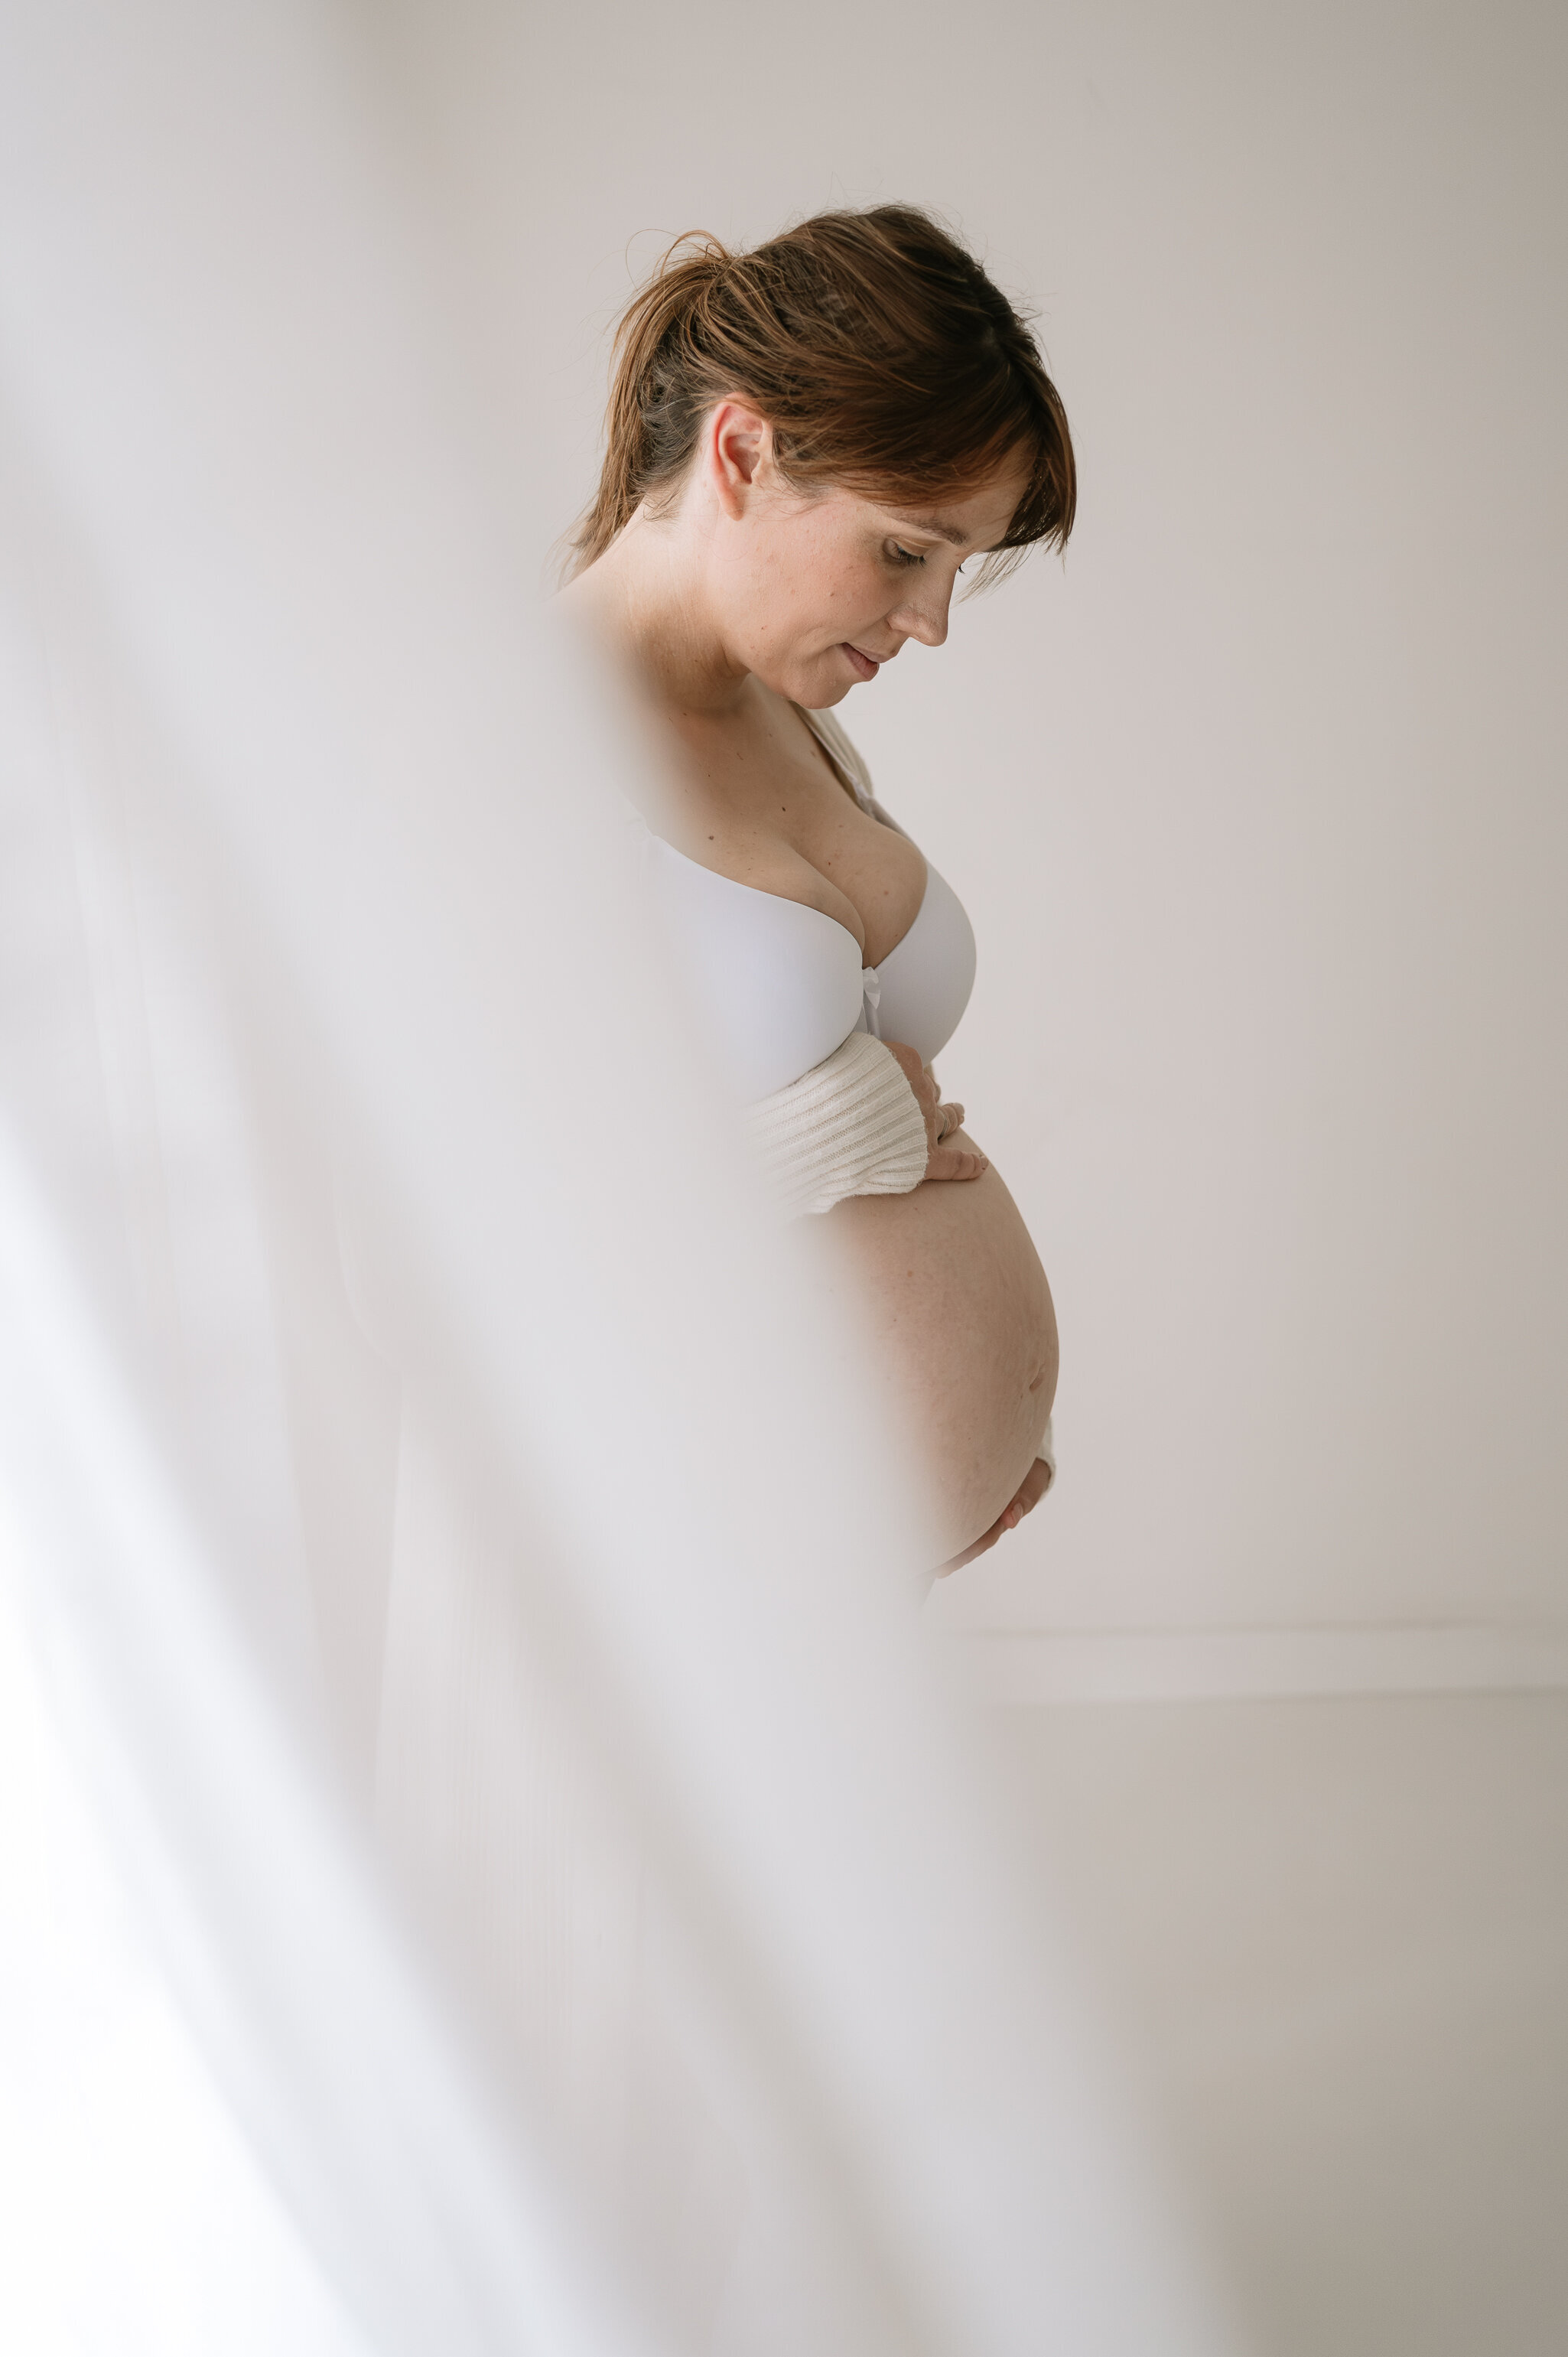 maternity photographer based in central York using natural lighting